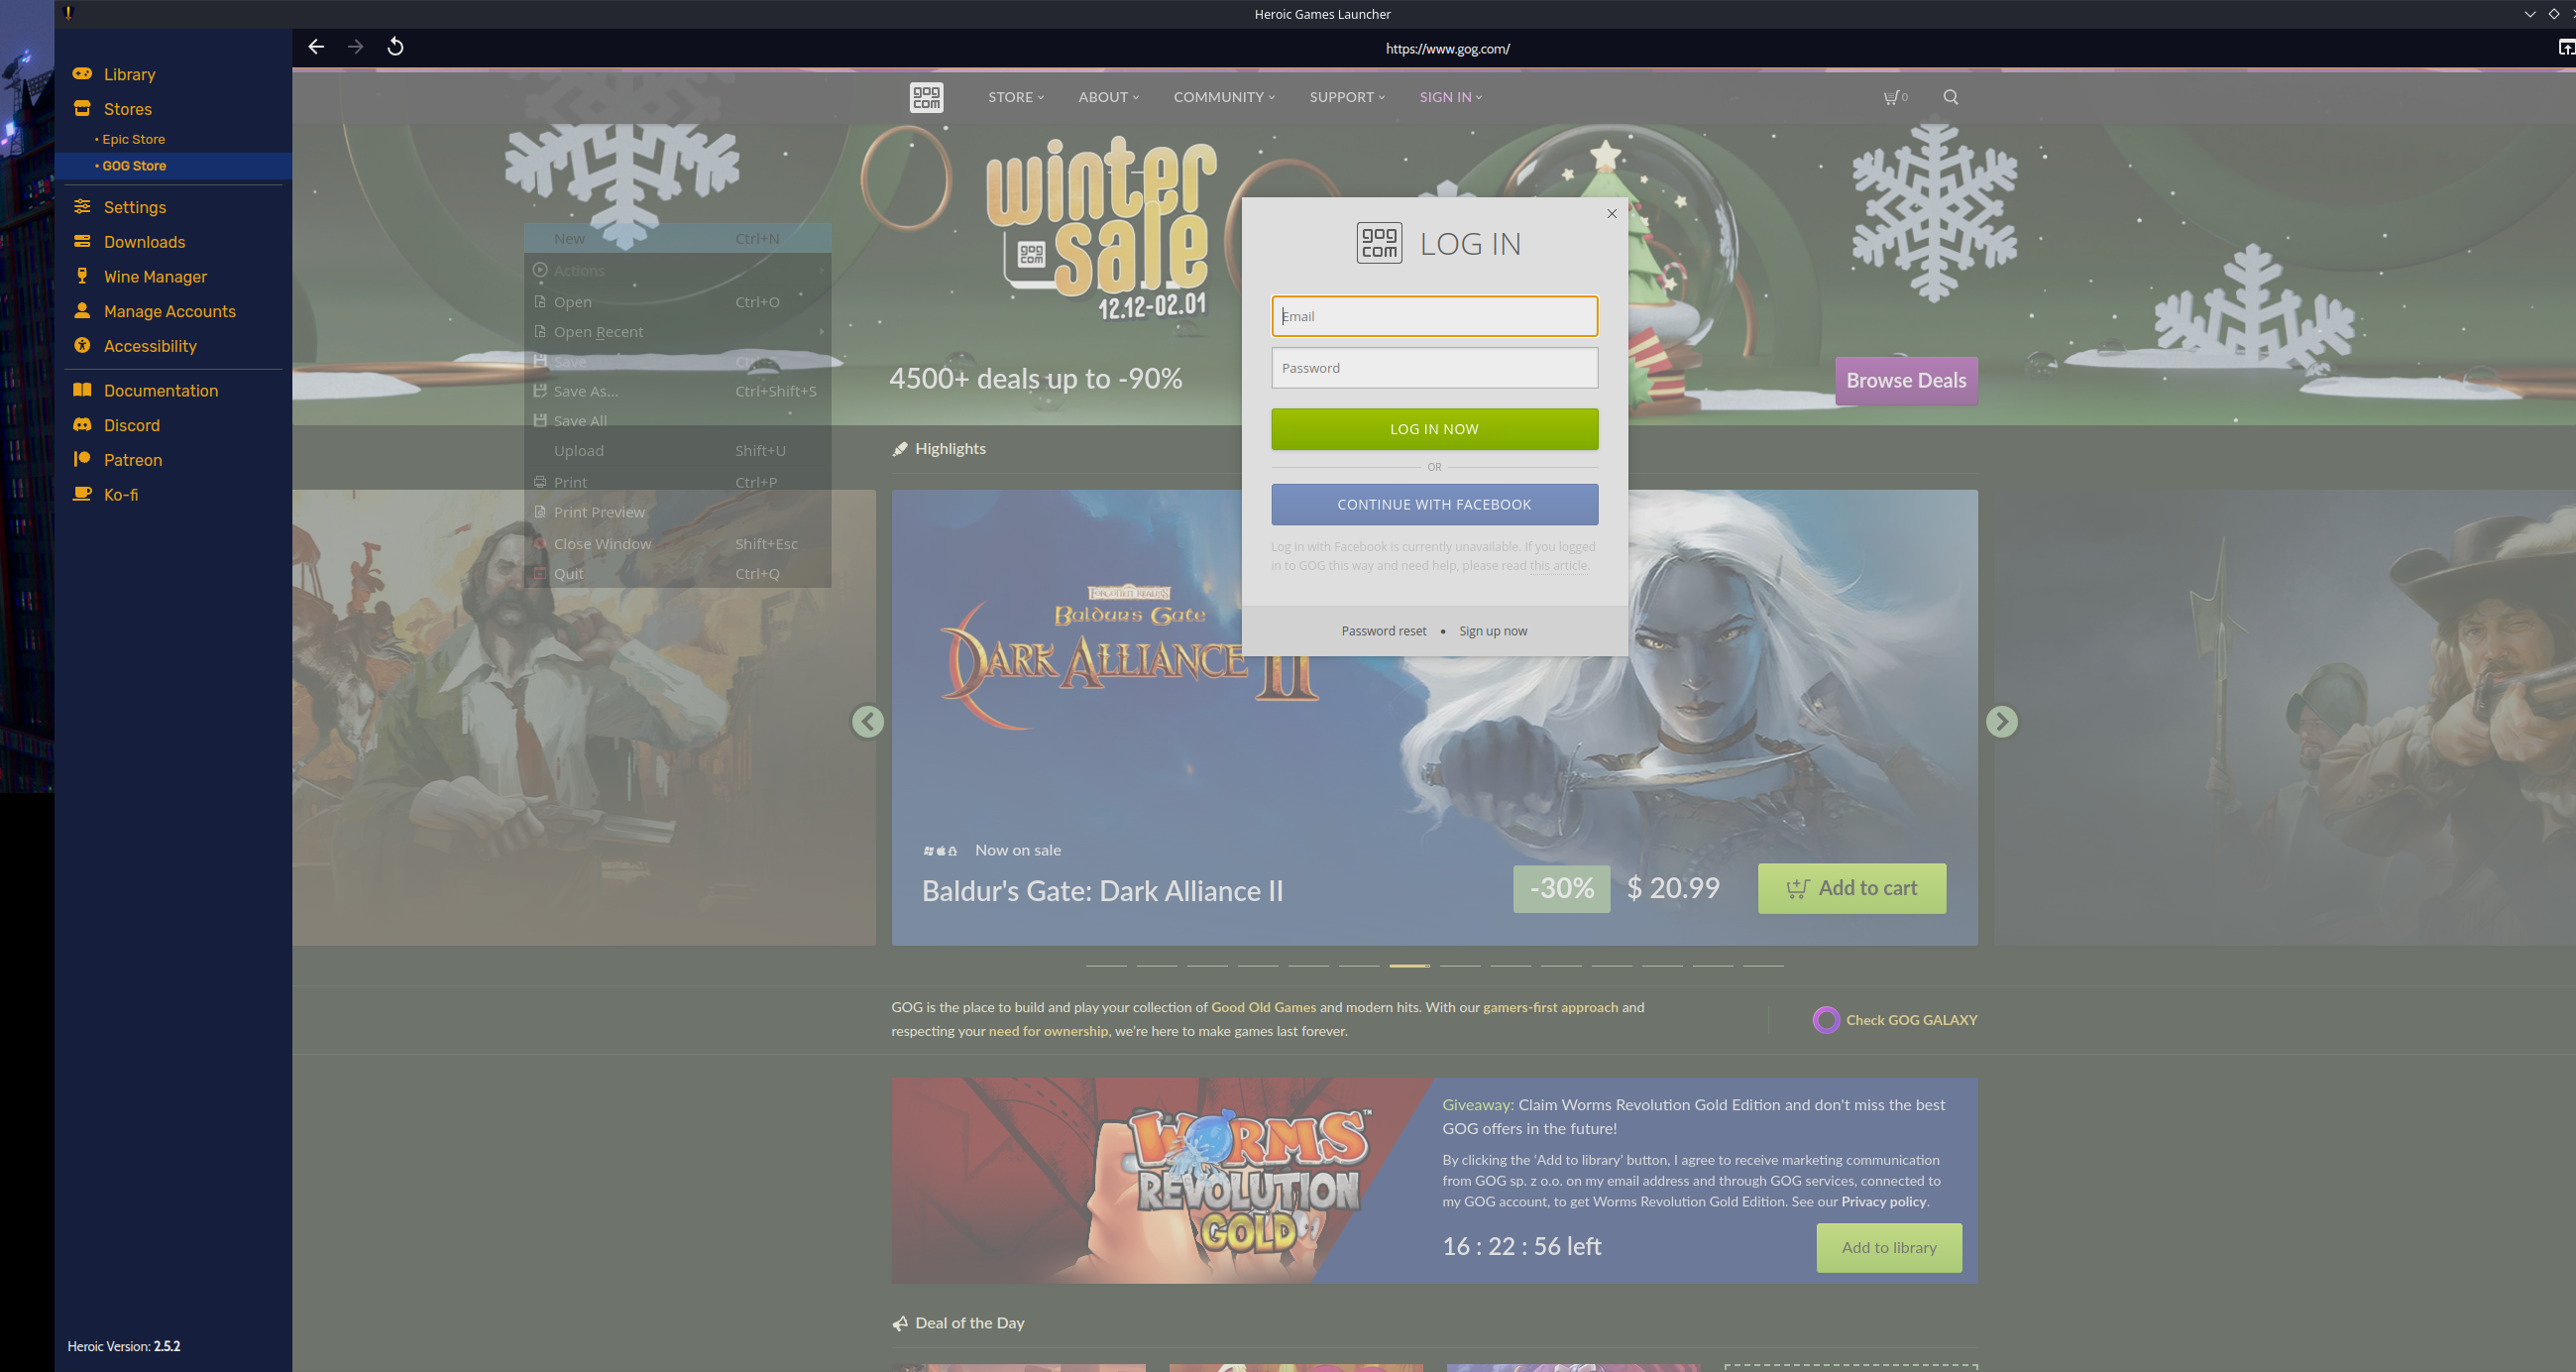 Heroic Games Launcher for GOG and Epic Games v2.5.0 Beta 3 out now